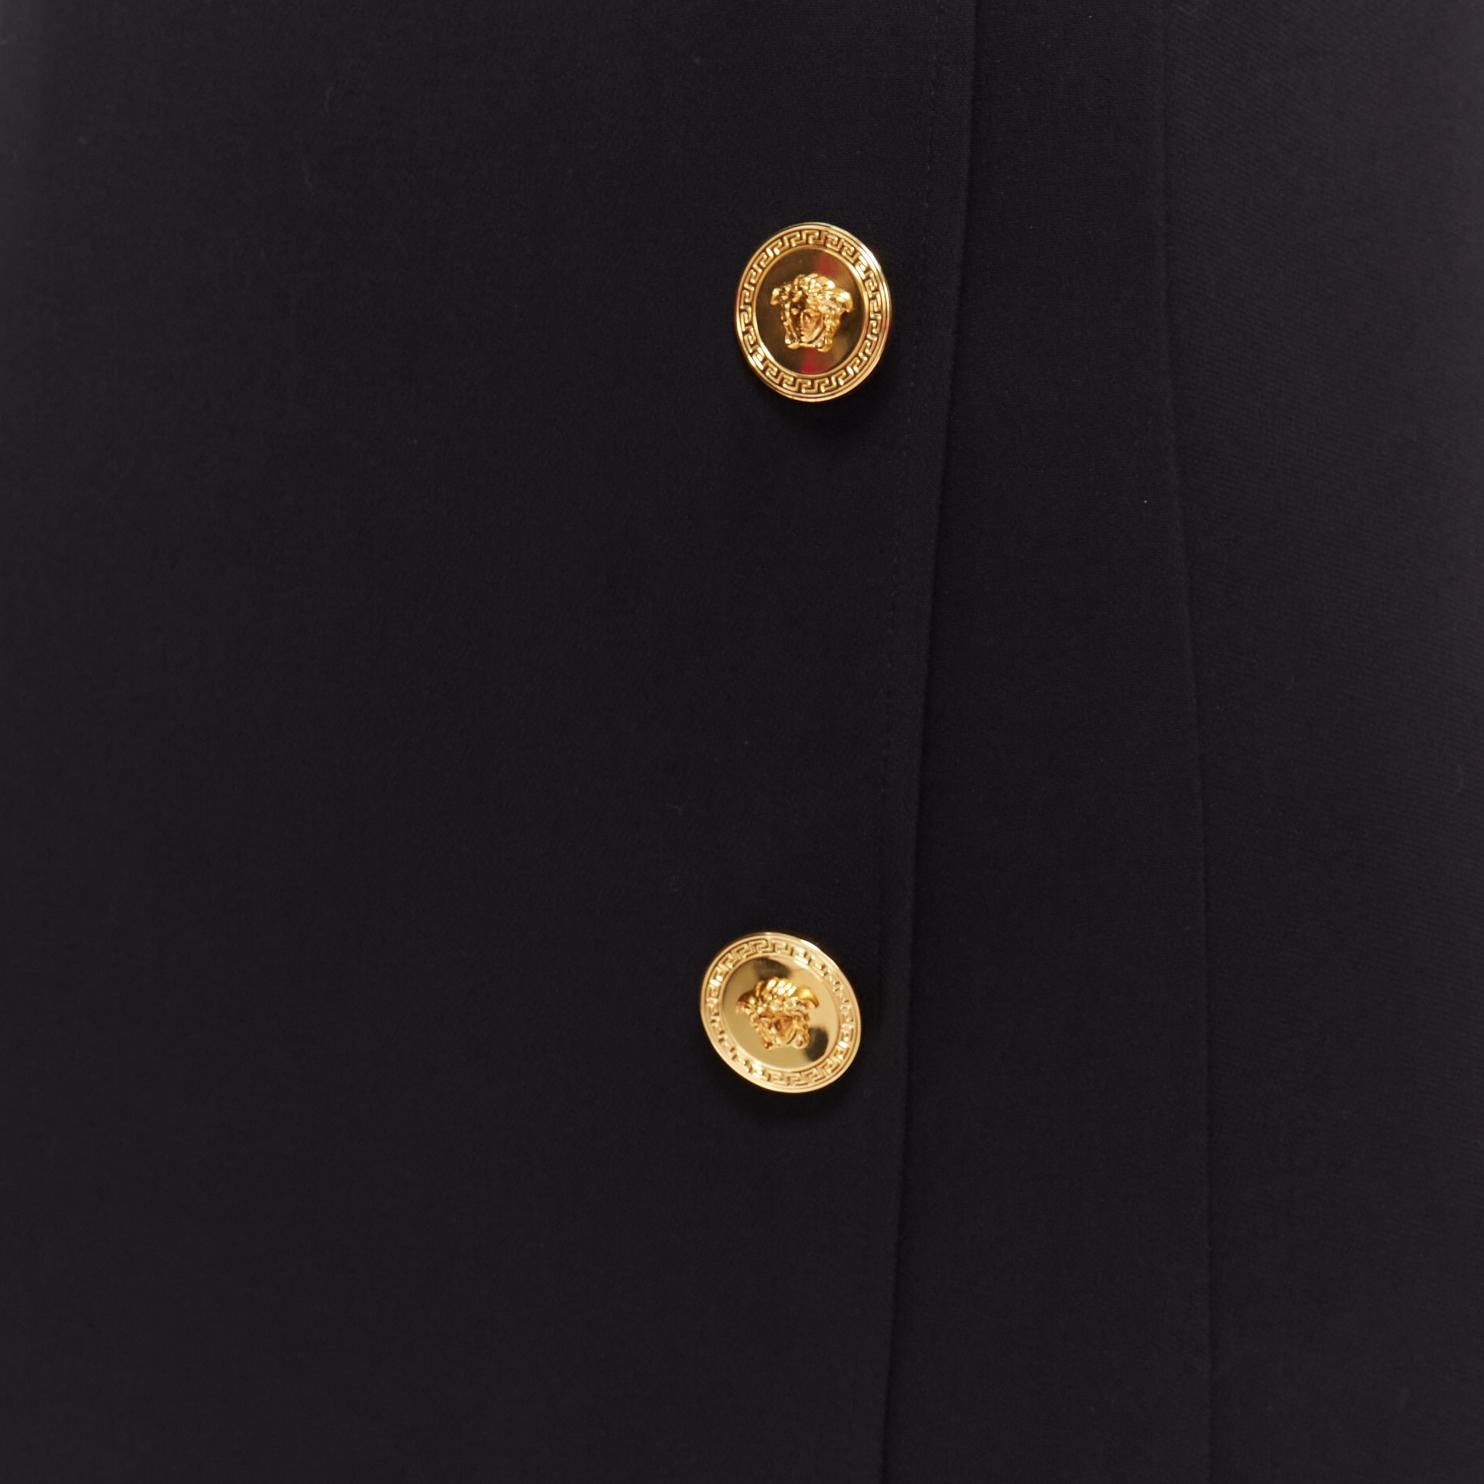 VERSACE 2019 gold Medusa buttons black barocco double breasted dress IT36 XXS
Reference: TGAS/D00977
Brand: Versace
Designer: Donatella Versace
Collection: 2019
Material: Viscose, Blend
Color: Black, Gold
Pattern: Barocco
Closure: Snap